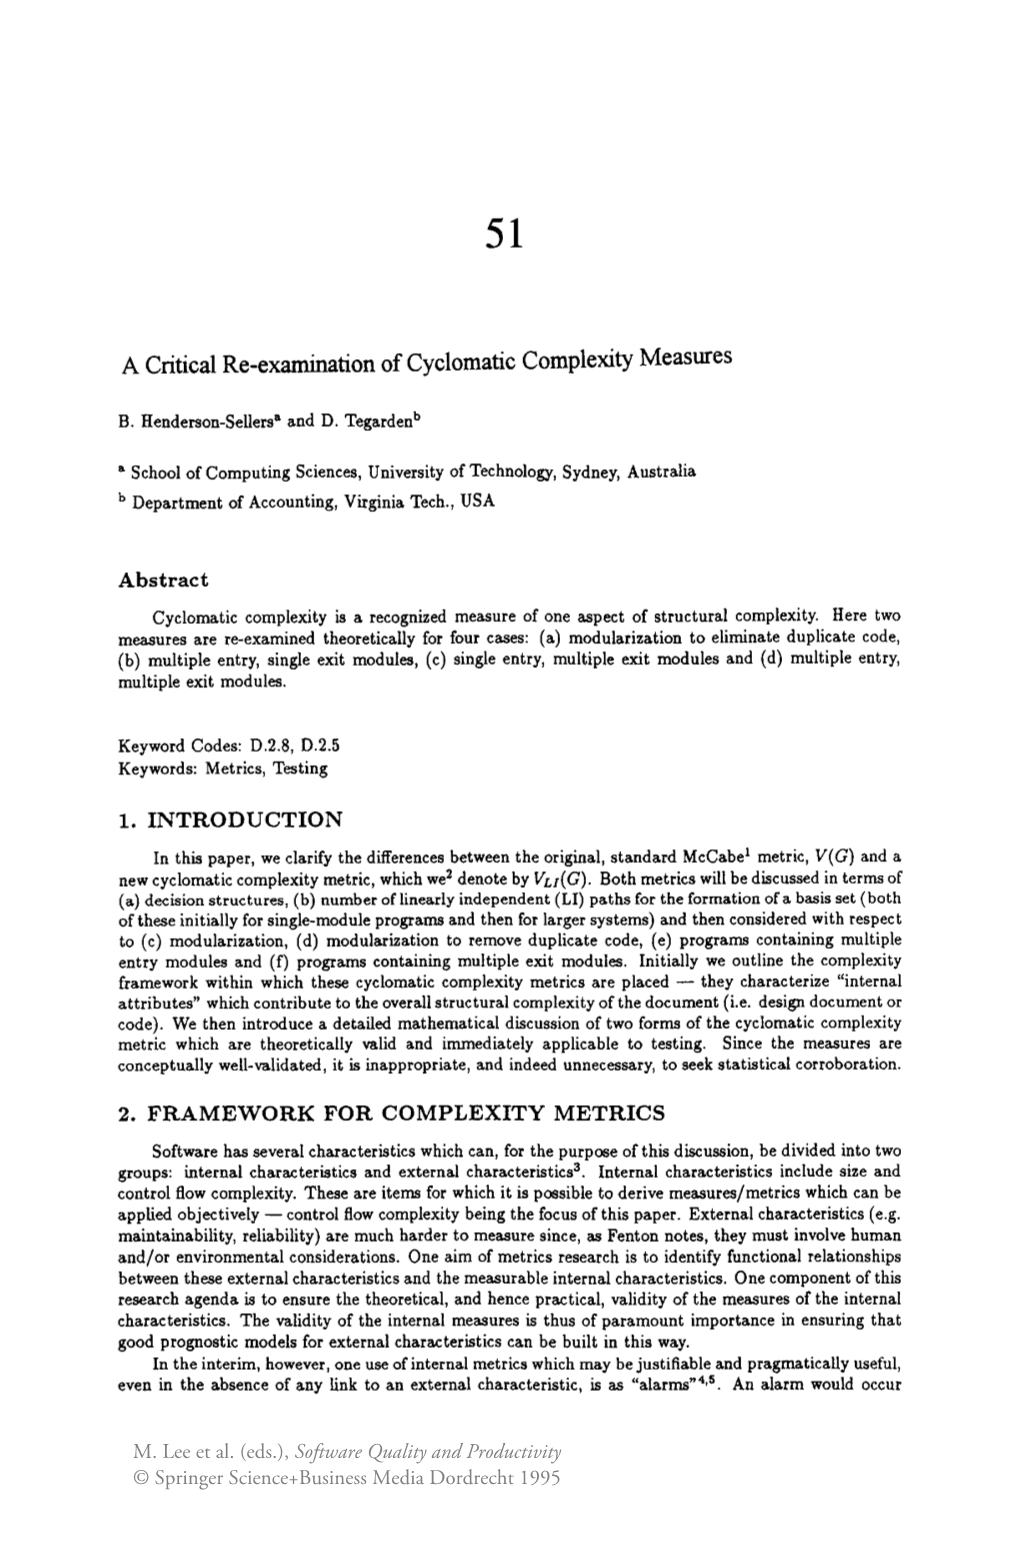 A Critical Re-Examination of Cyclomatic Complexity Measures